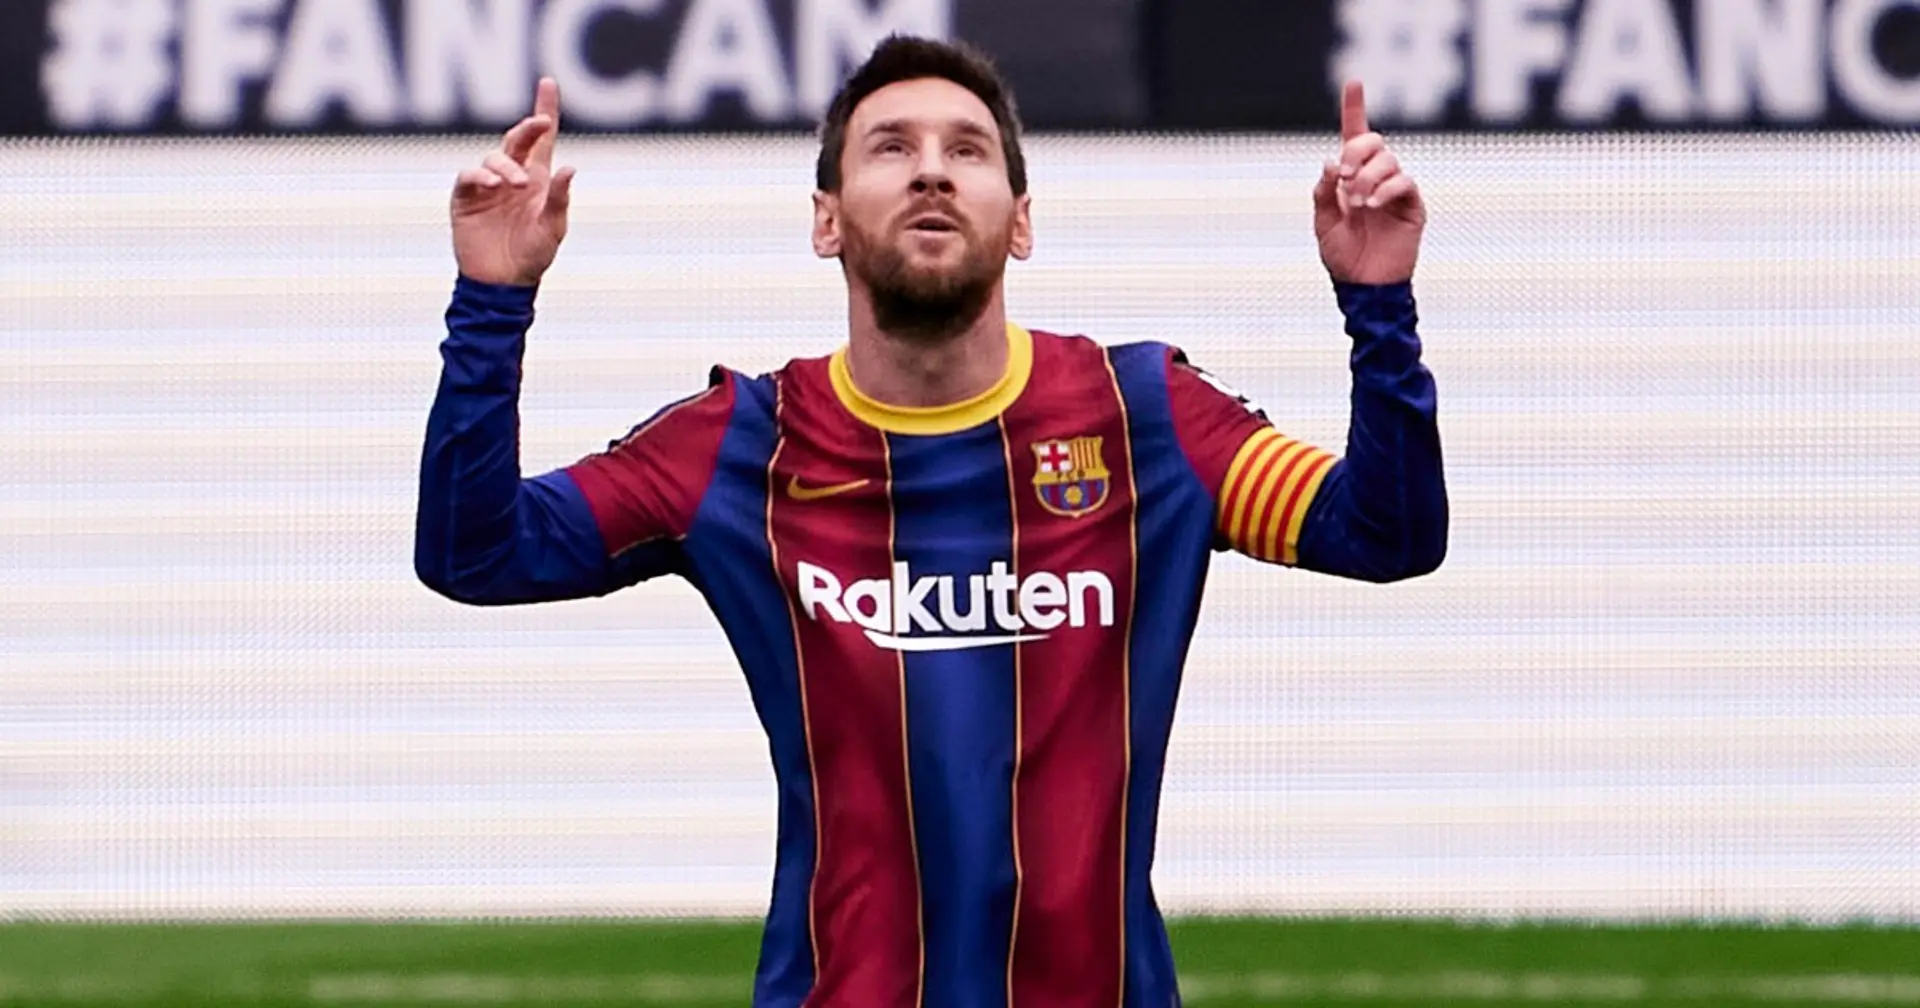 Astonishing numbers: Cadiz become 81st club Leo Messi scores against